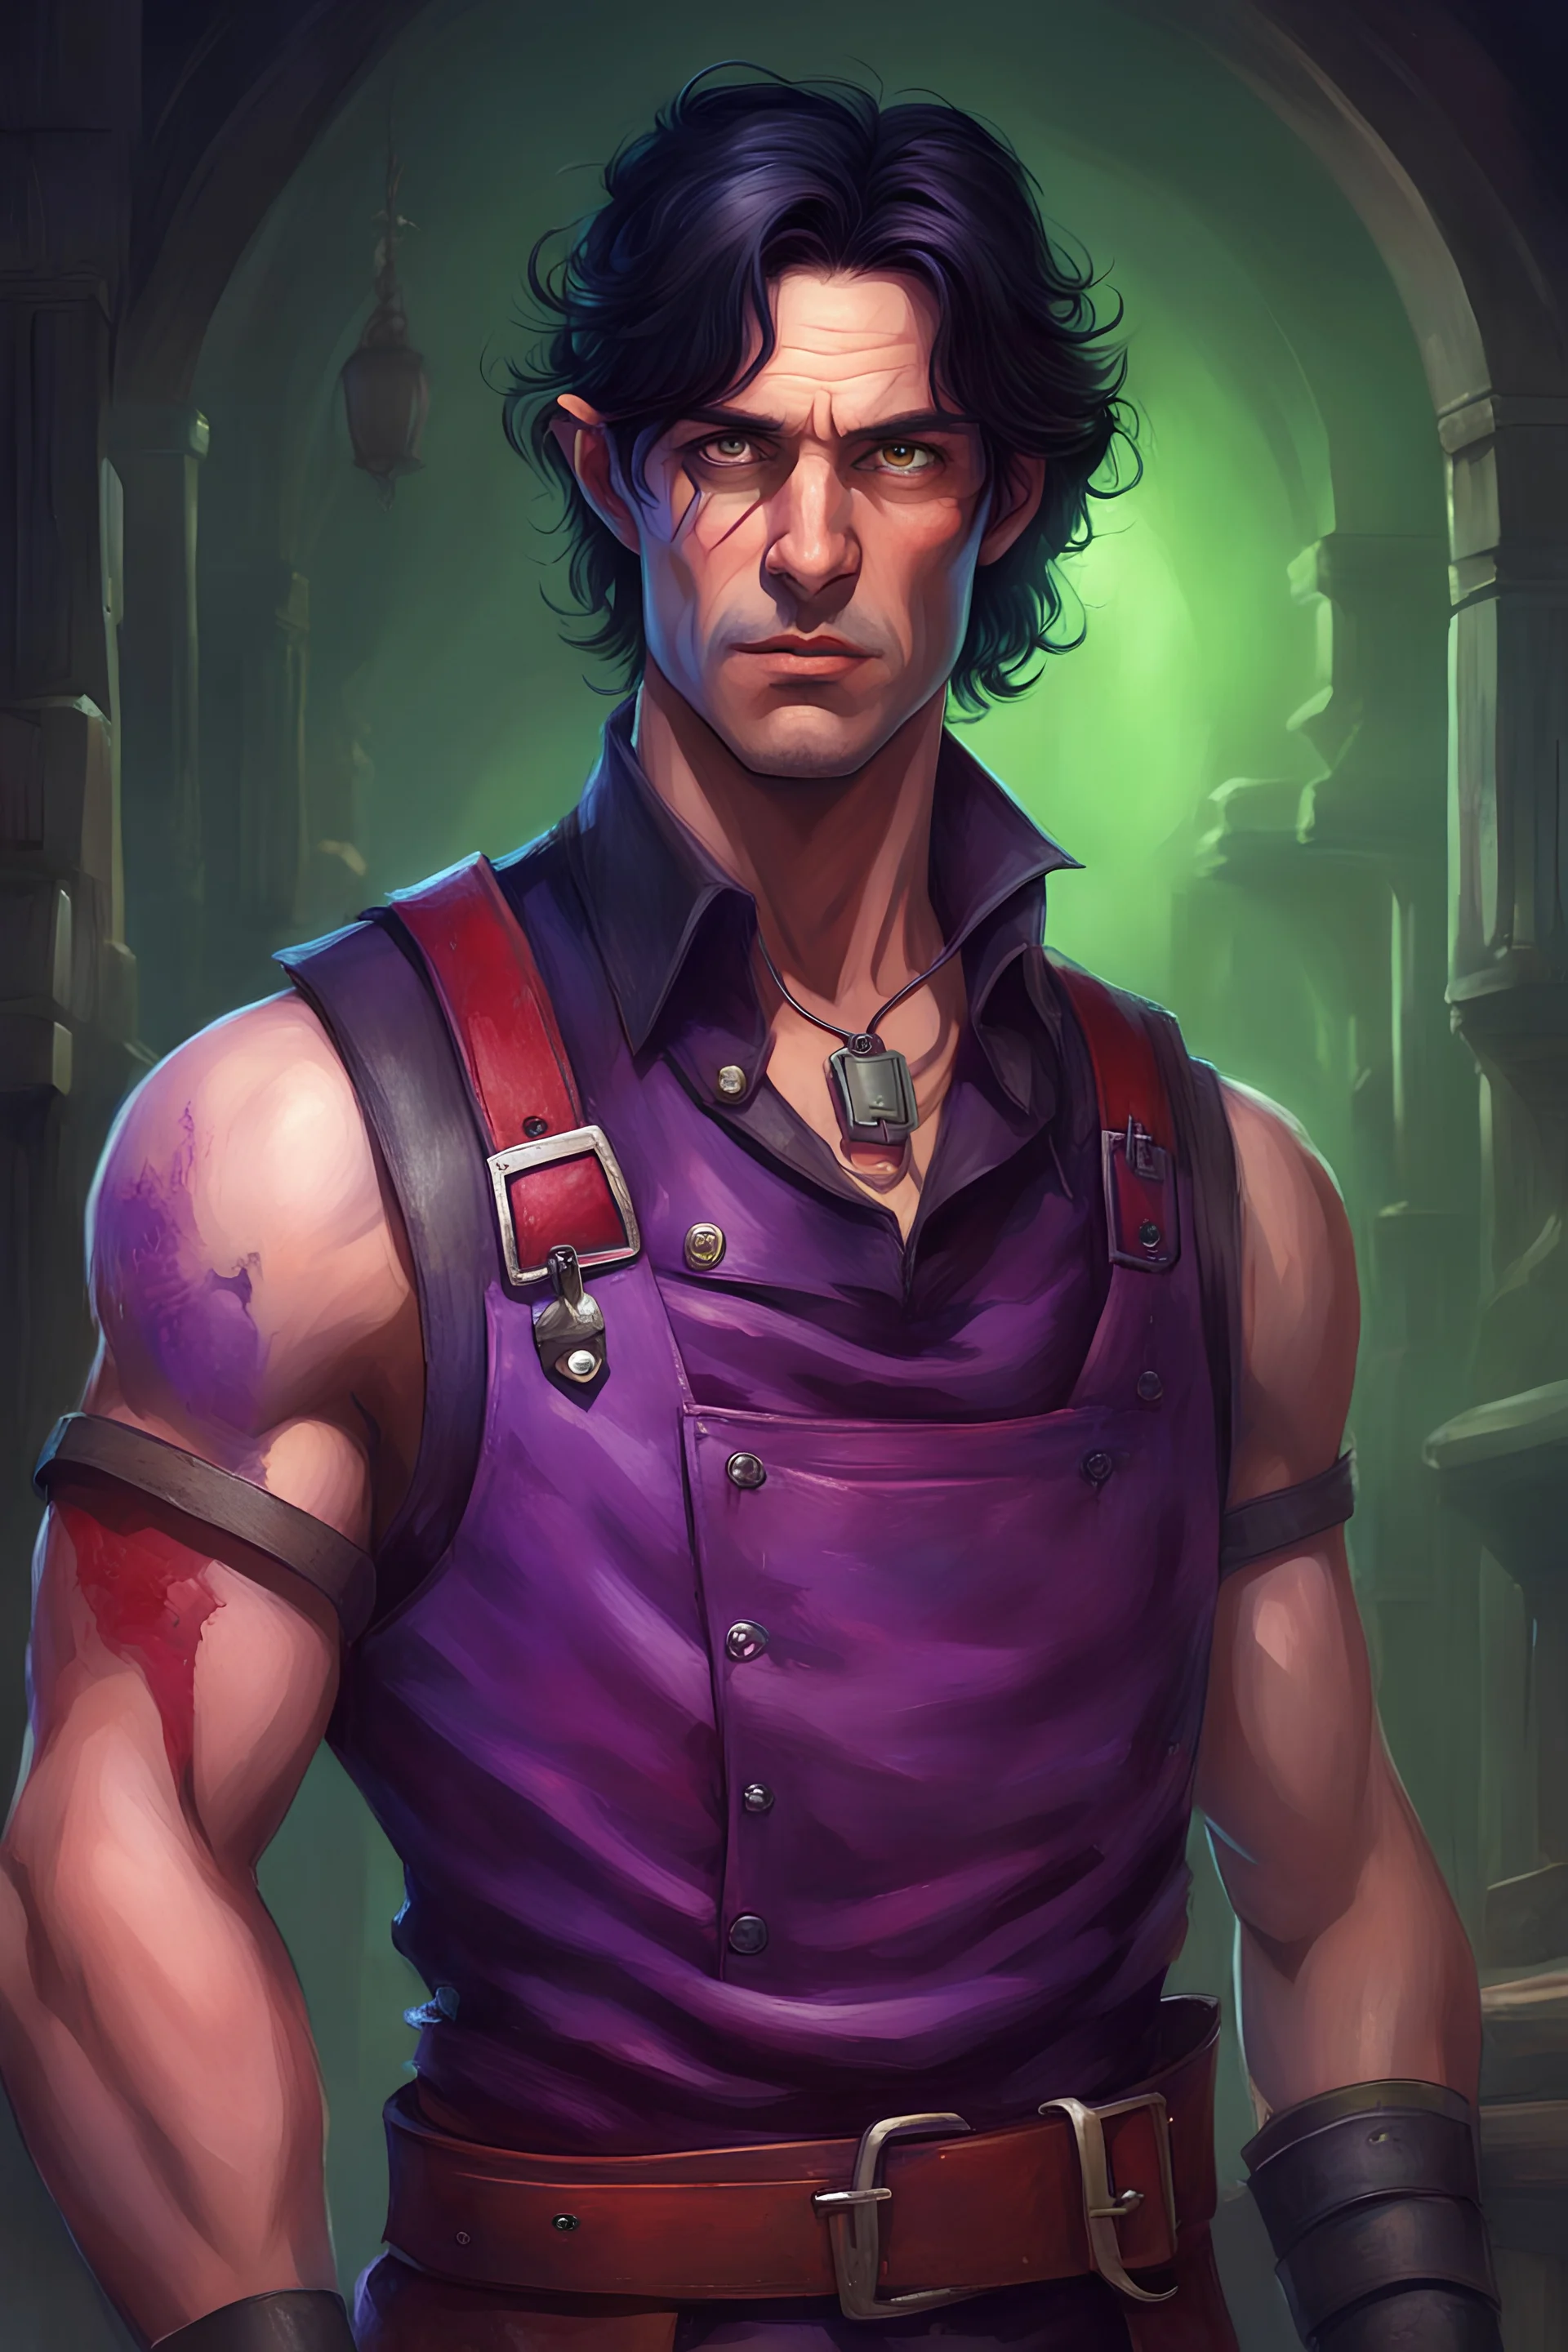 portrait of a human Male inventor in a fantasy world with a lighting Scar on his right arm from wrist to shoulder that is dark purple and red in color with Black hair and Bright Green eyes Wearing heavy leather apron and sleeveless shirt